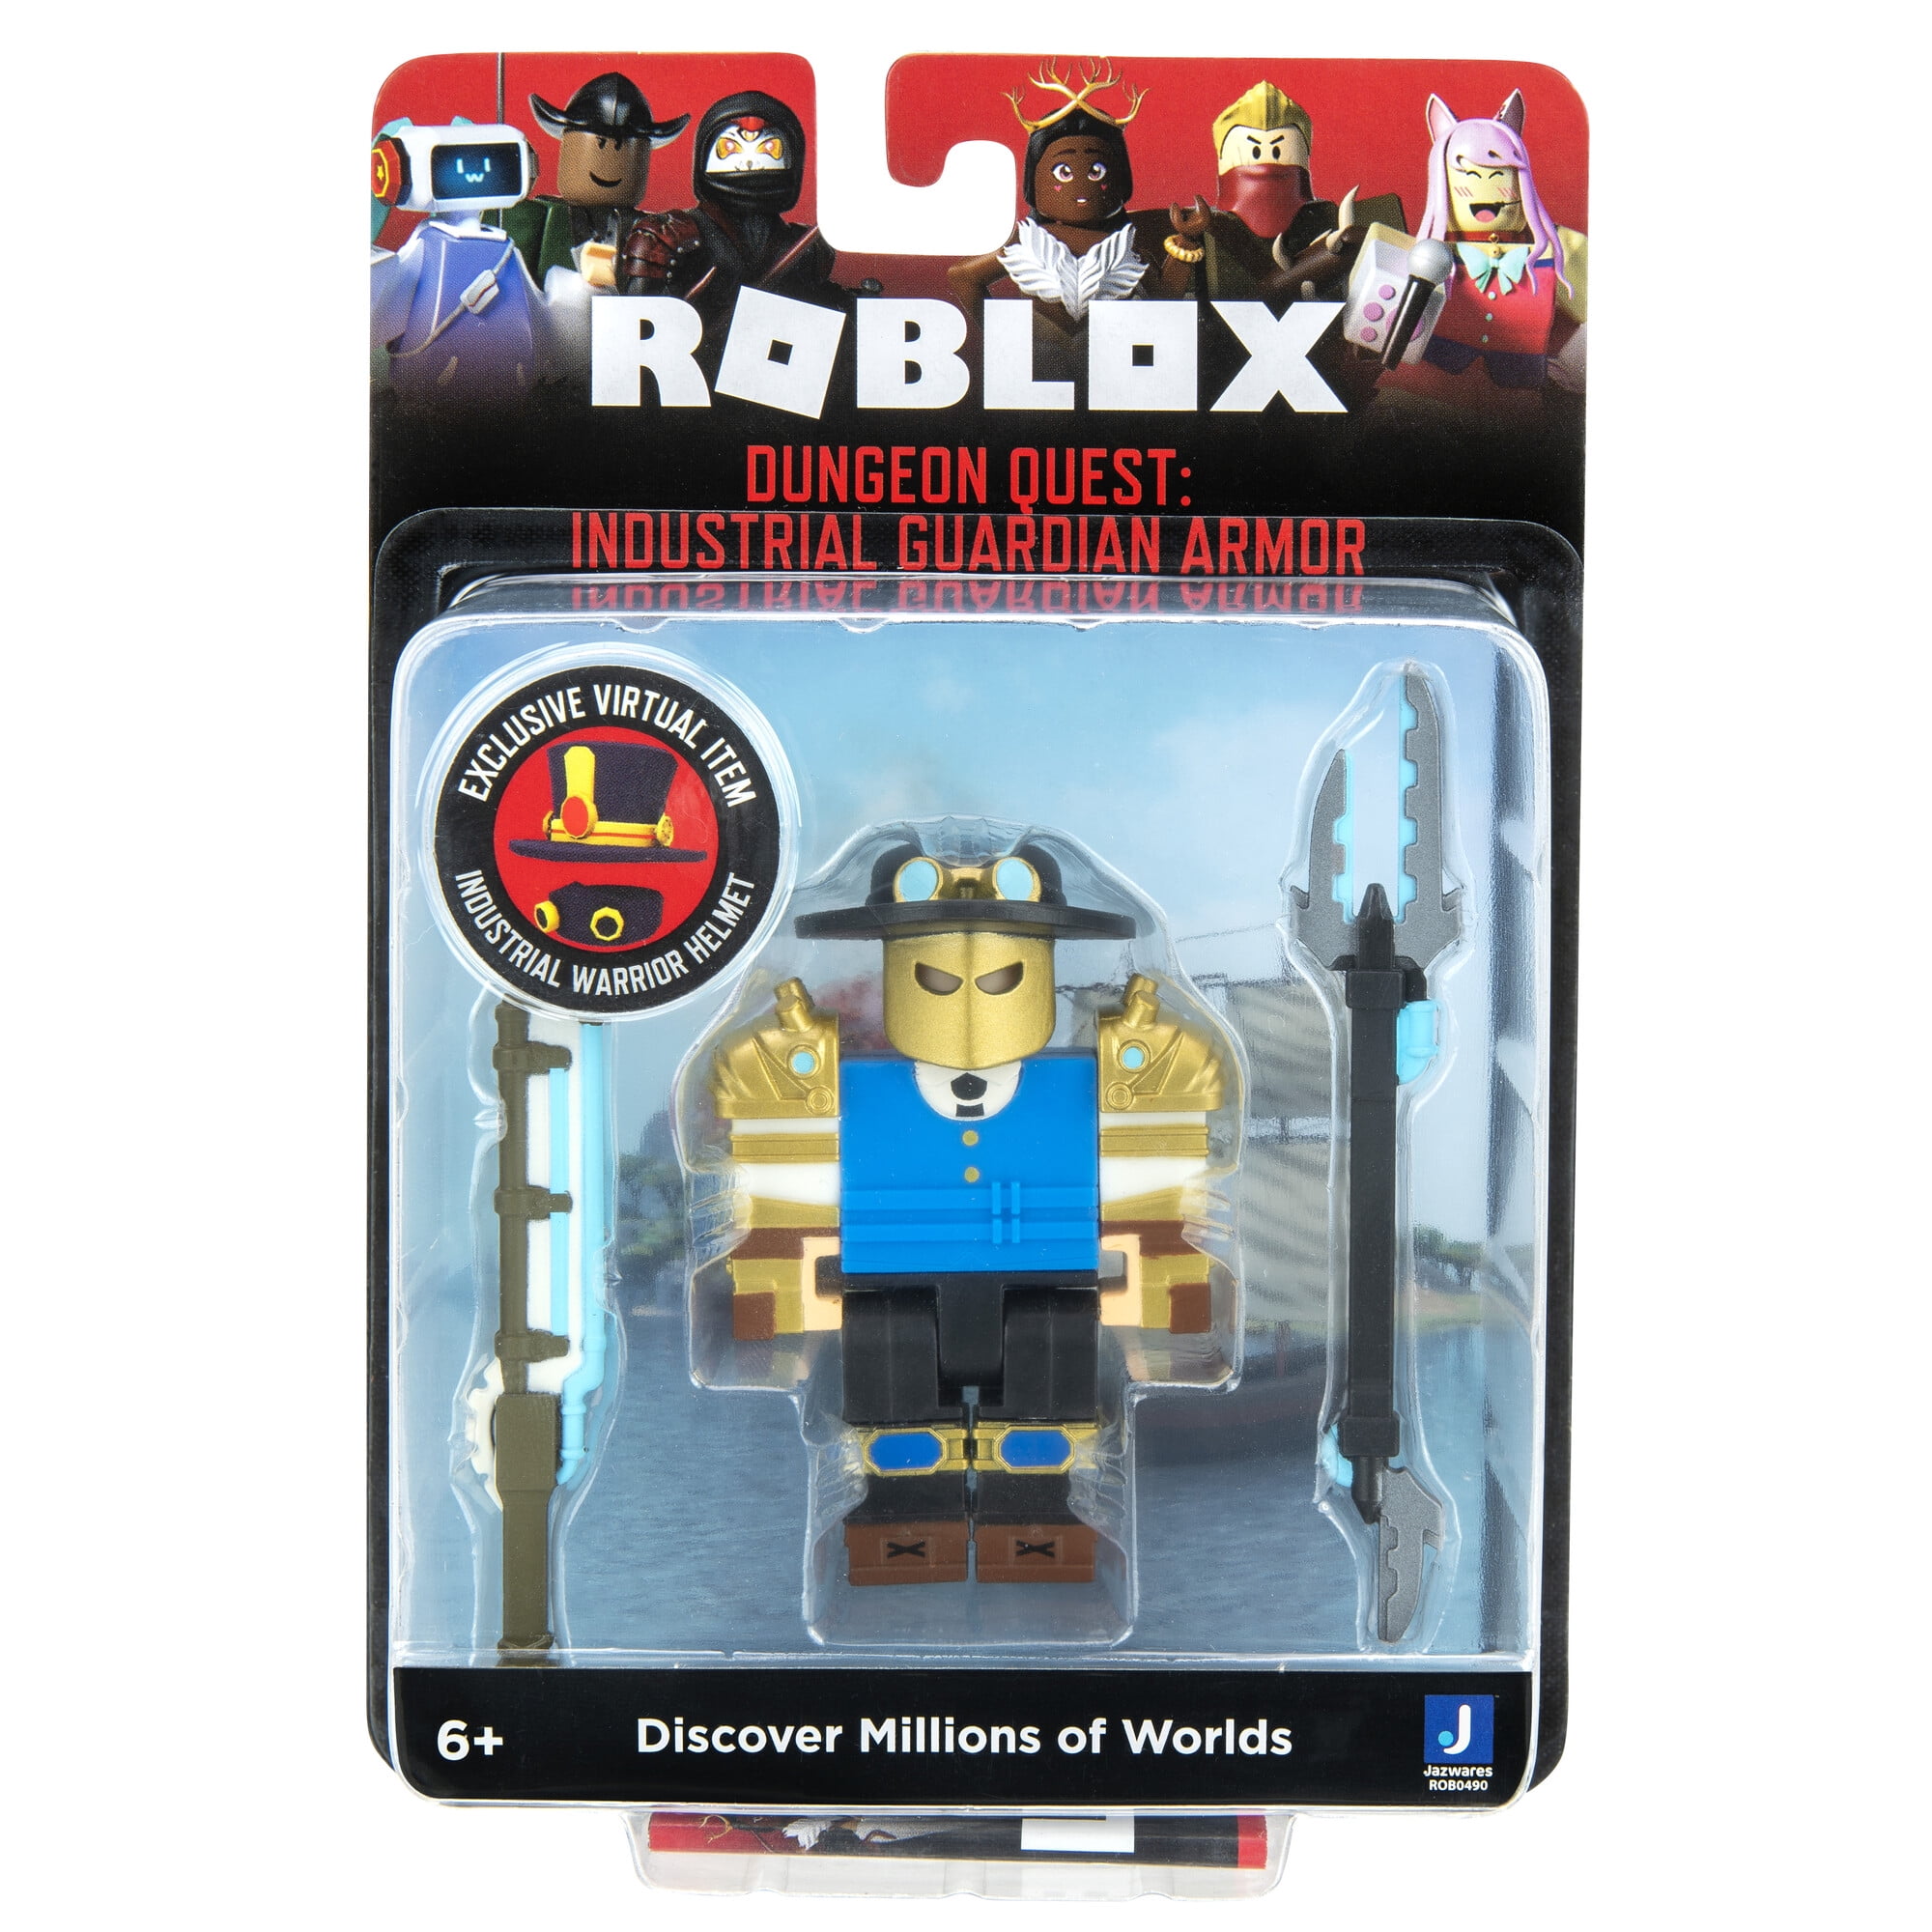 Redeem #Roblox exclusive virtual items at Roblox.com/Toys after